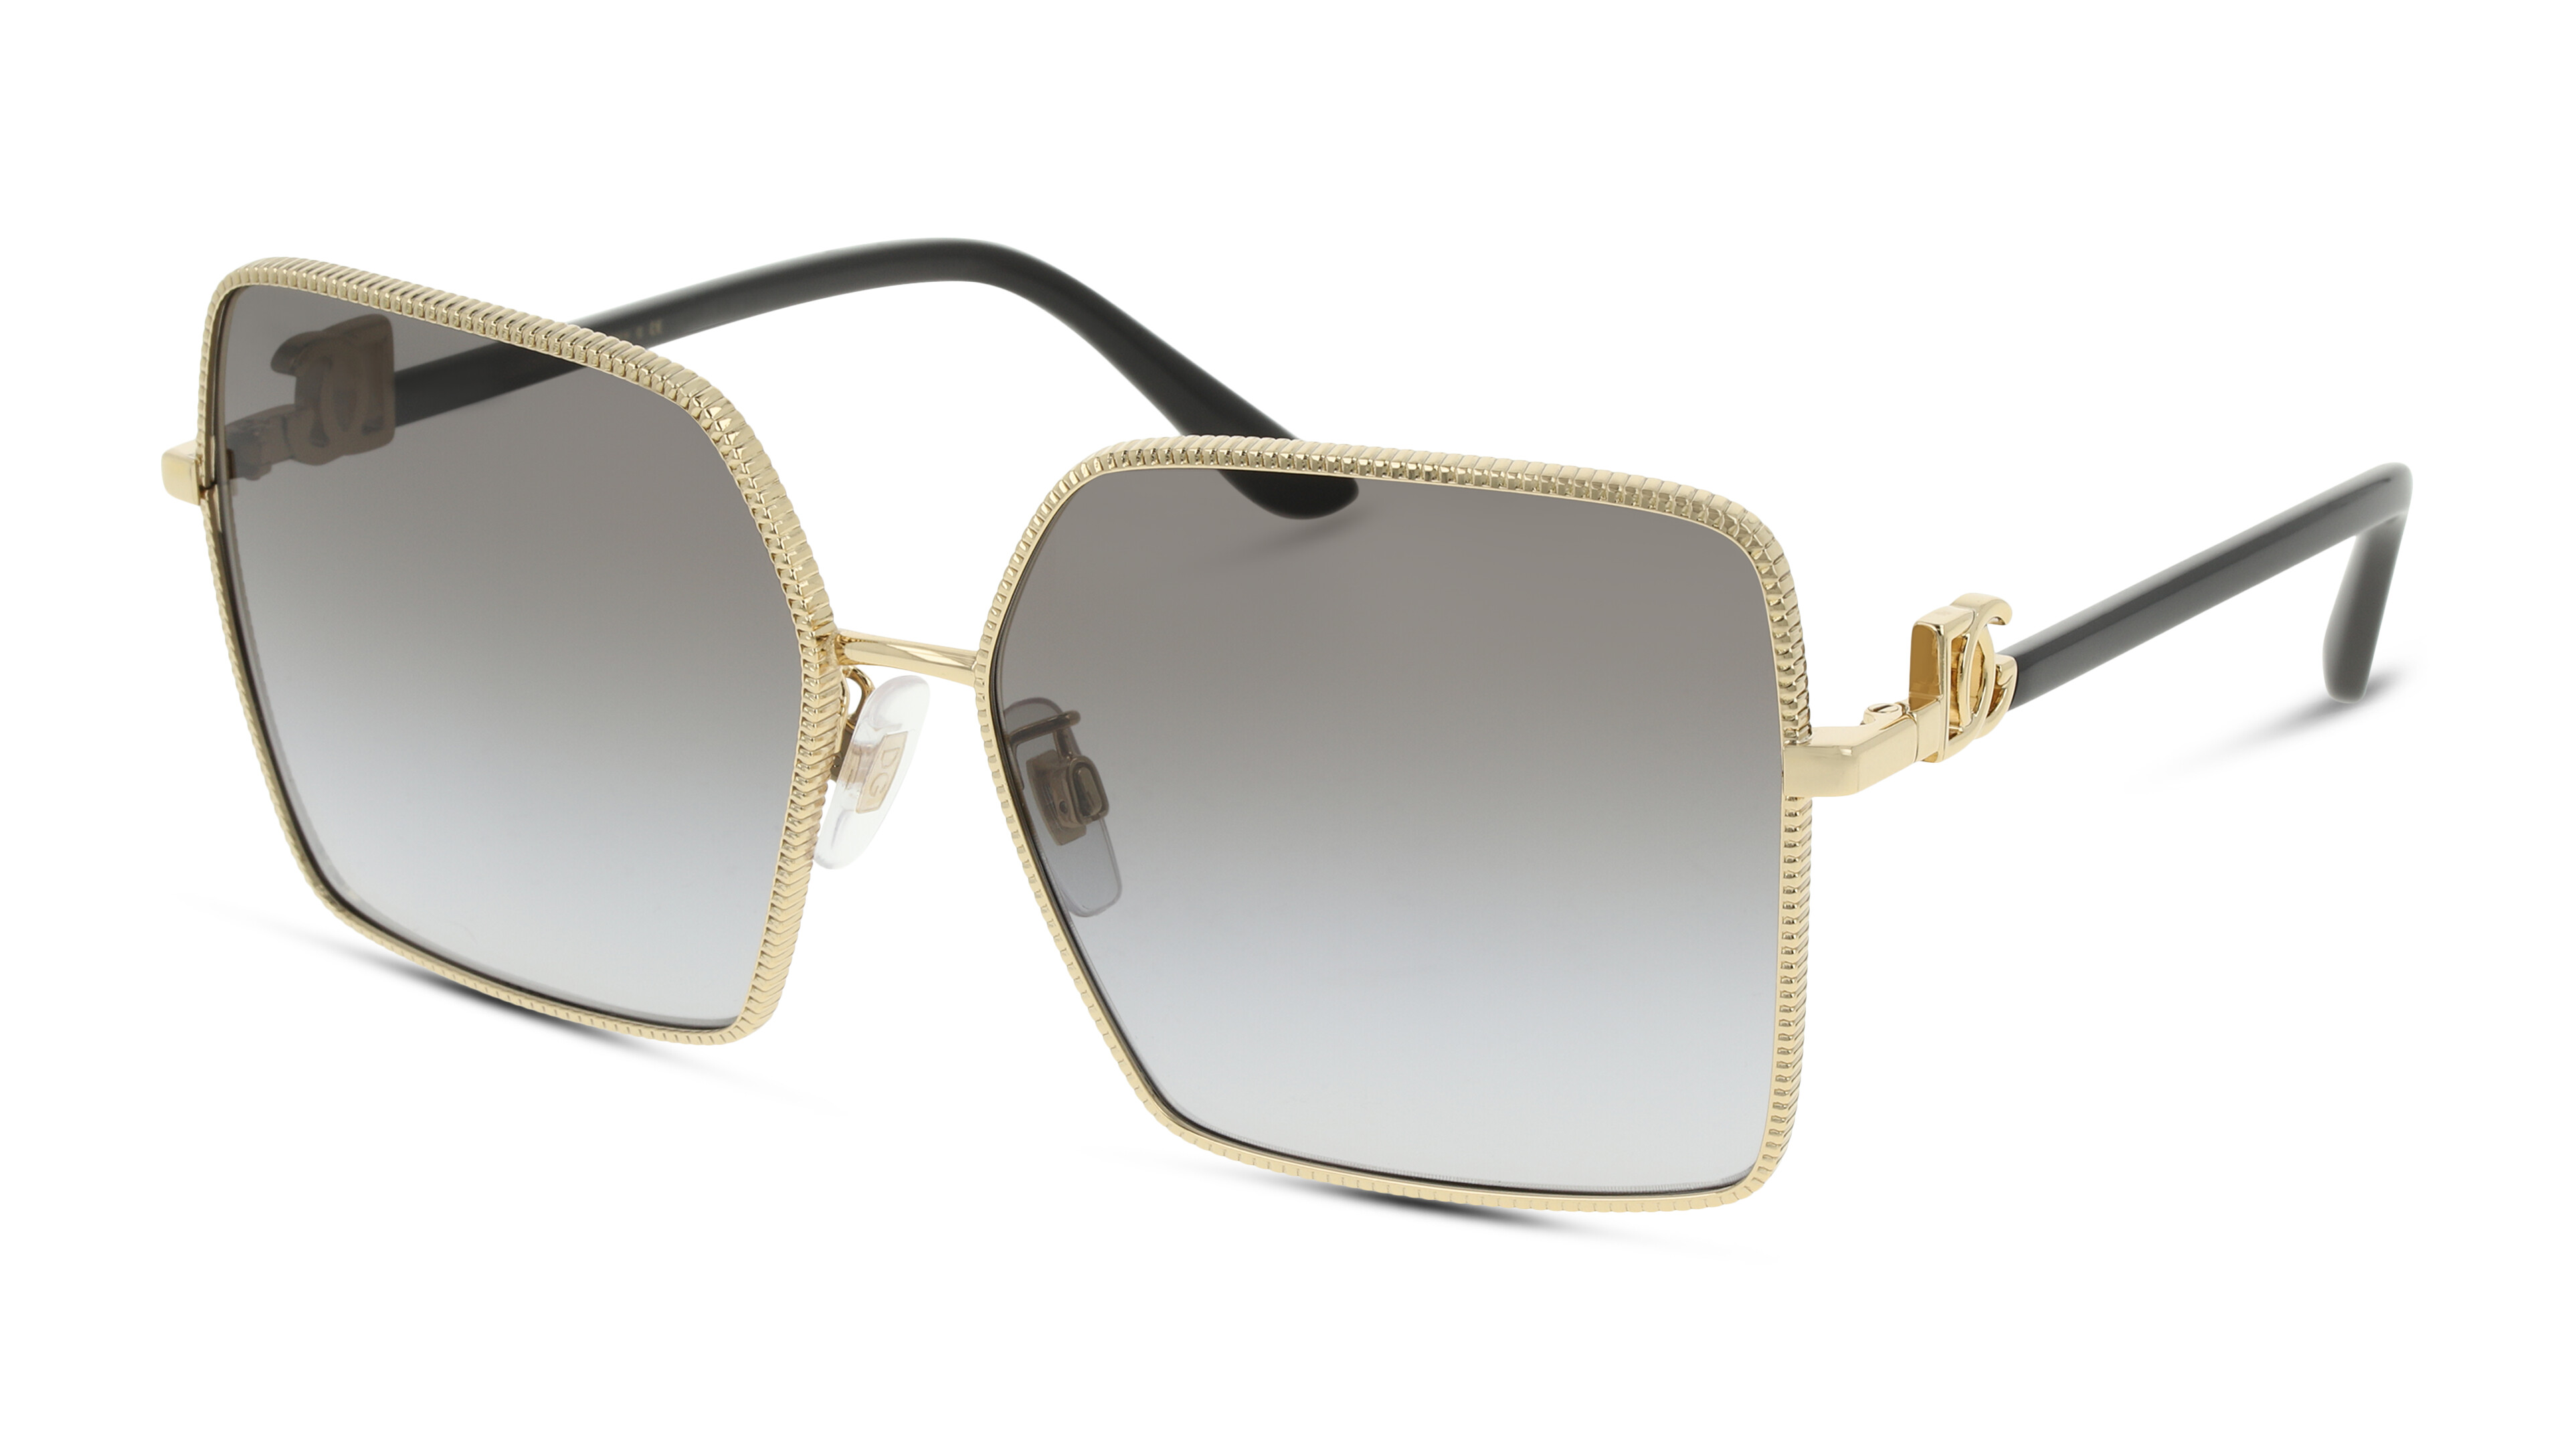 [products.image.angle_left01] Dolce&Gabbana 0DG2279 02/8G Sonnenbrille